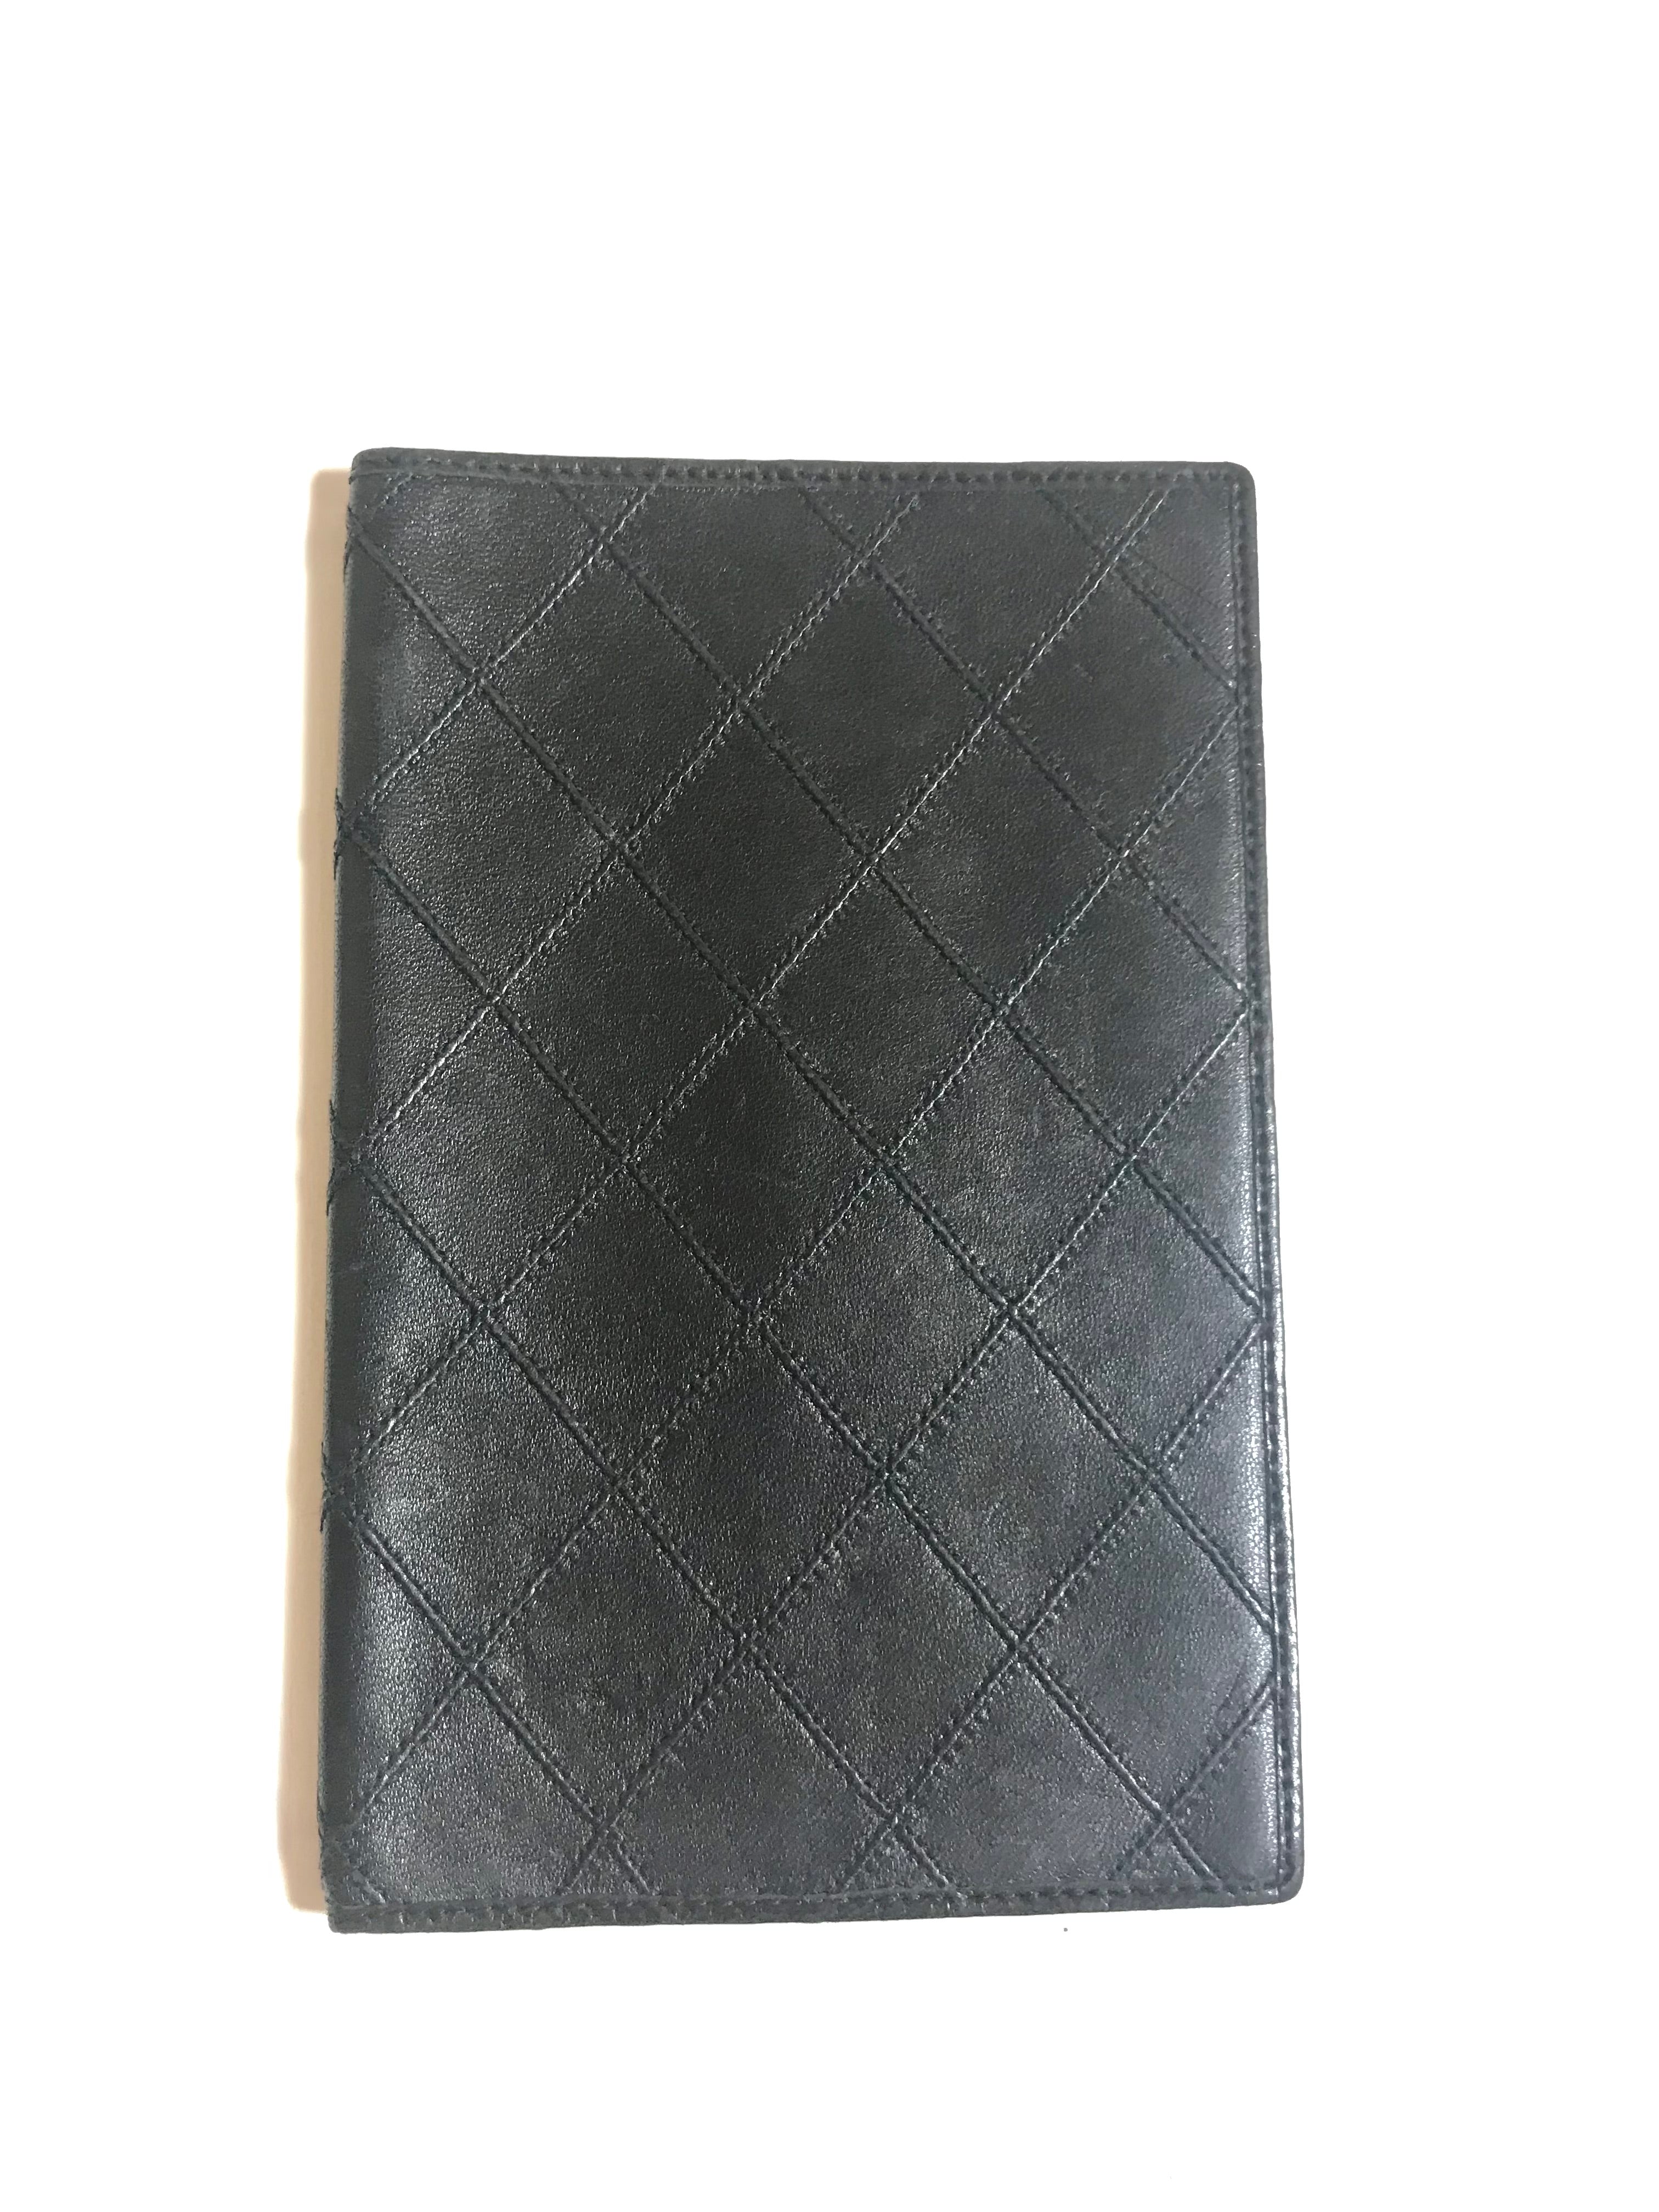 Authentic CHANEL Notebook cover Matelasse Cocomark Leather #4383